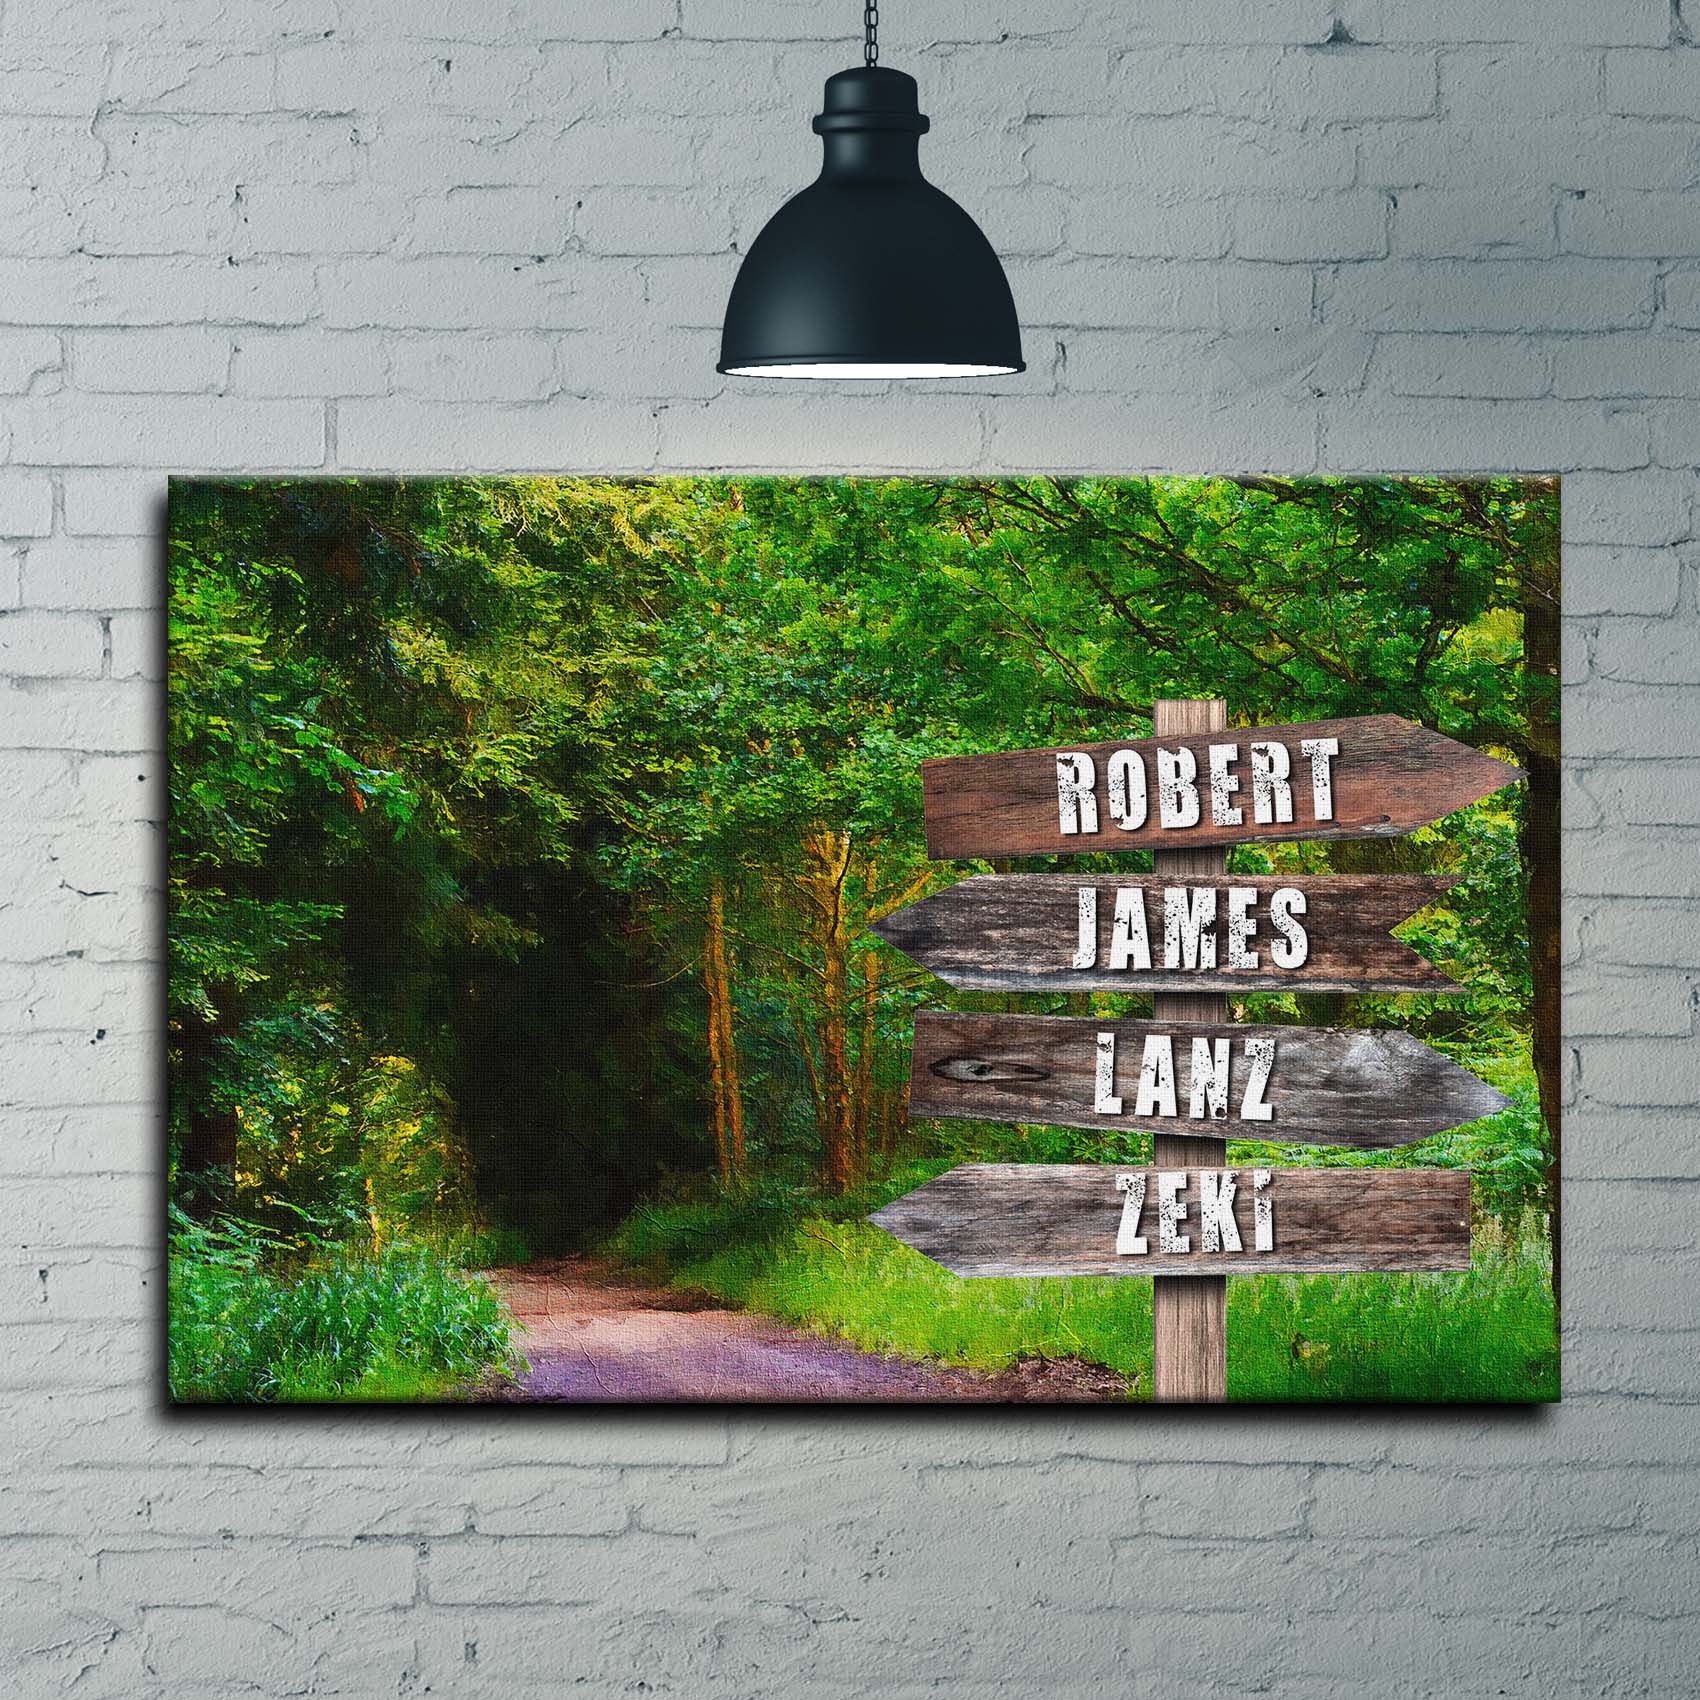 Into The Woods Name Sign - Image by Tailored Canvases